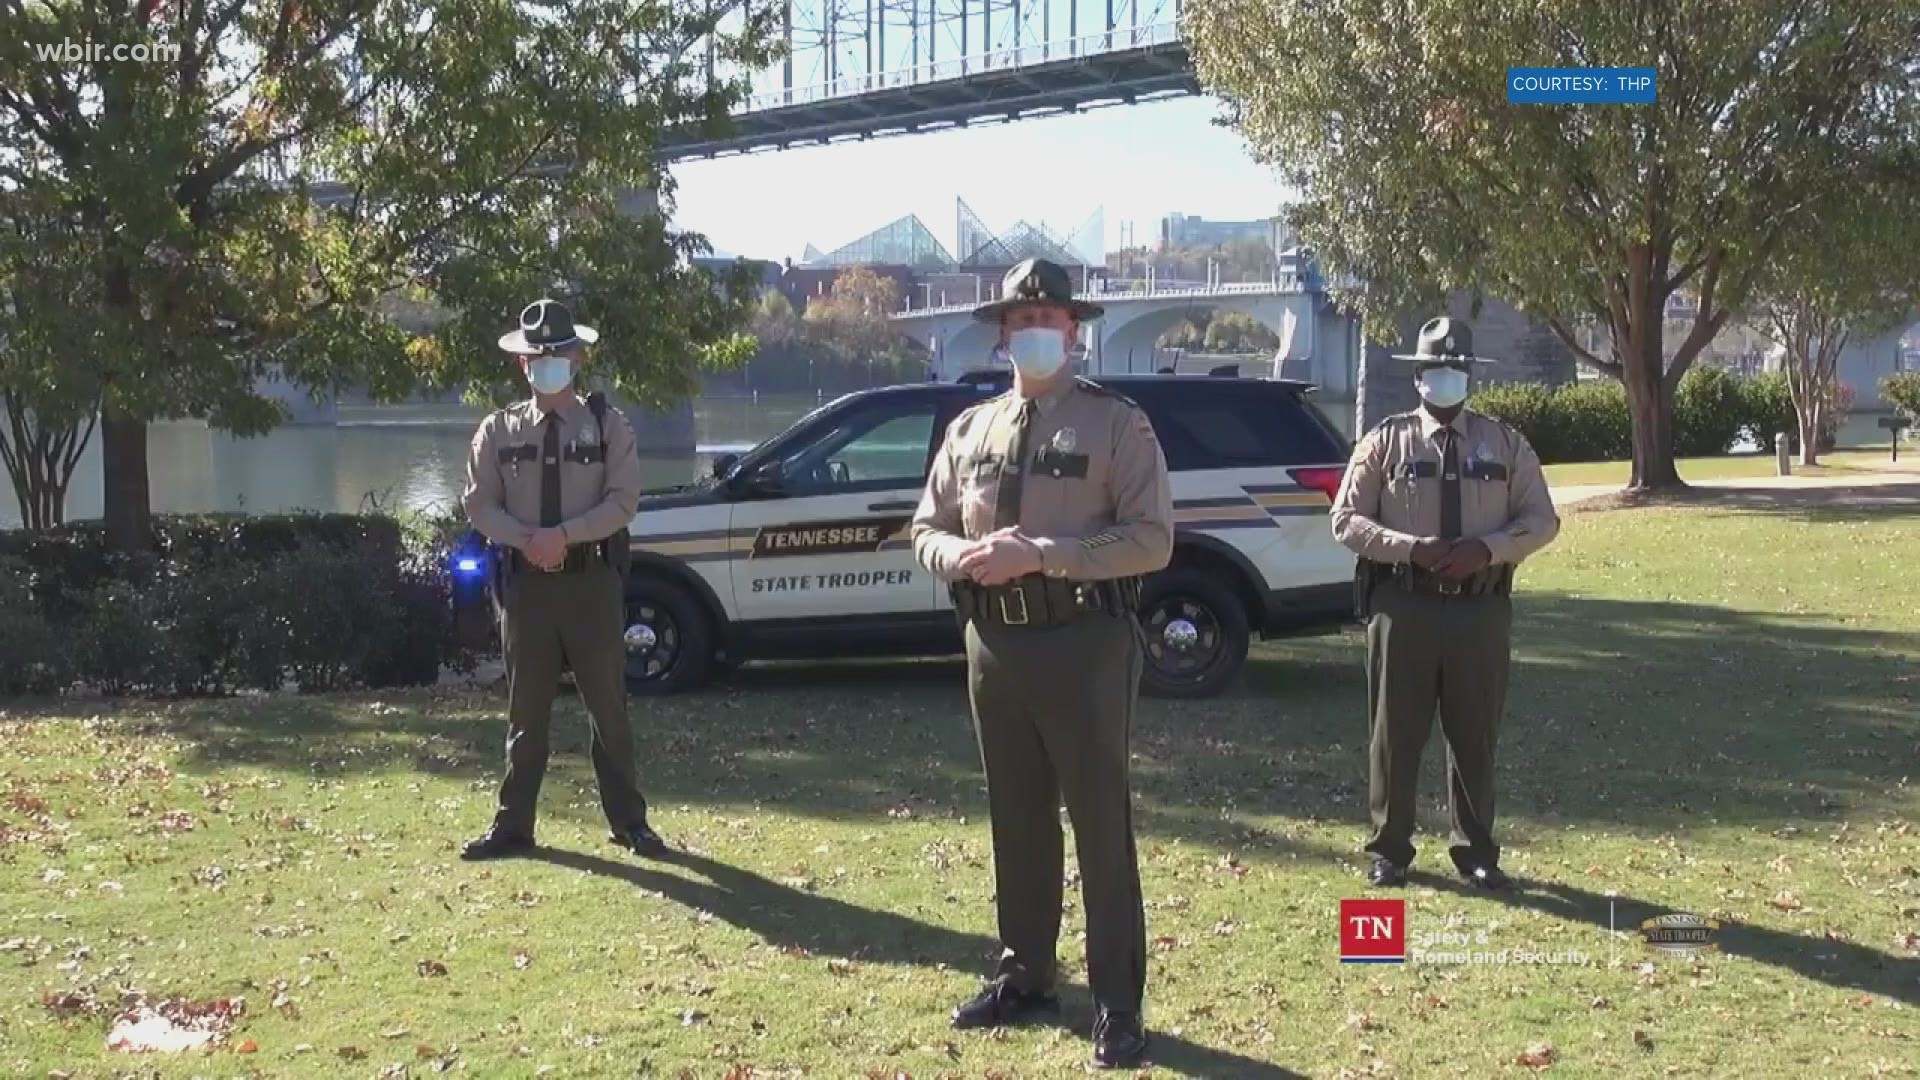 Tennessee troopers said they plan to increase their presence on the roads. They call it the "Tennessee Challenge."